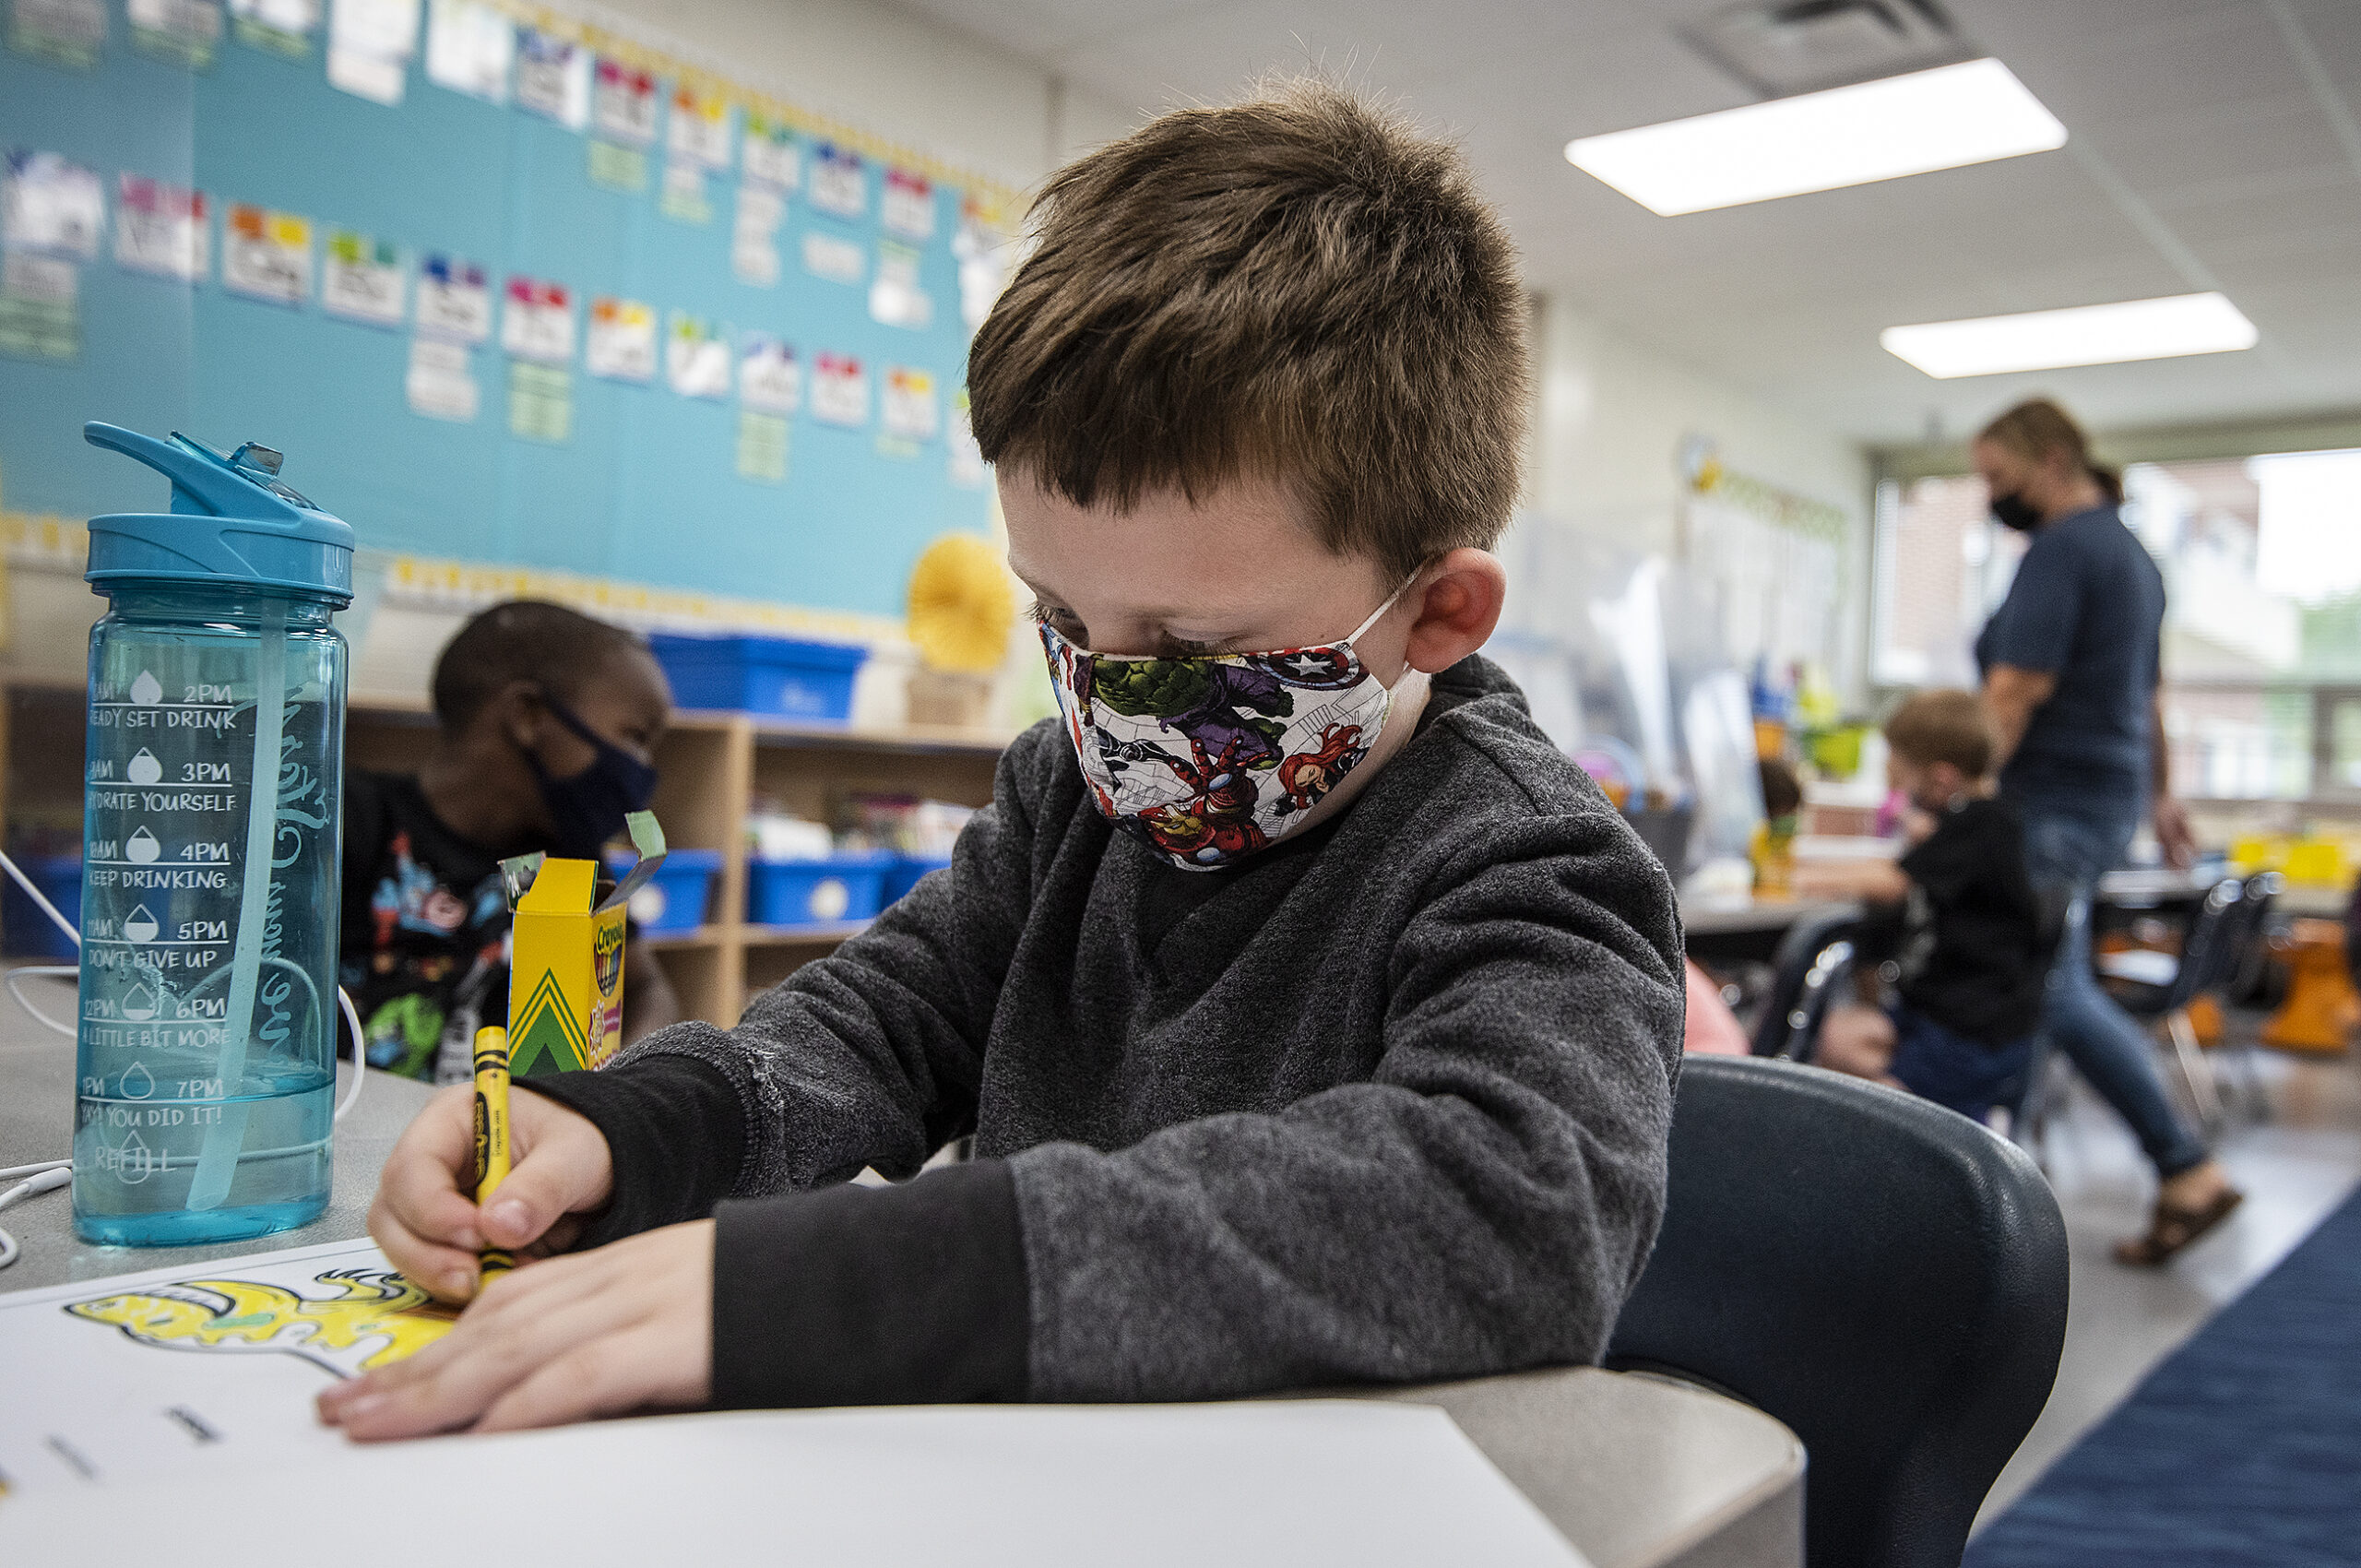 A boy in a face mask uses a crayon to color a picture.